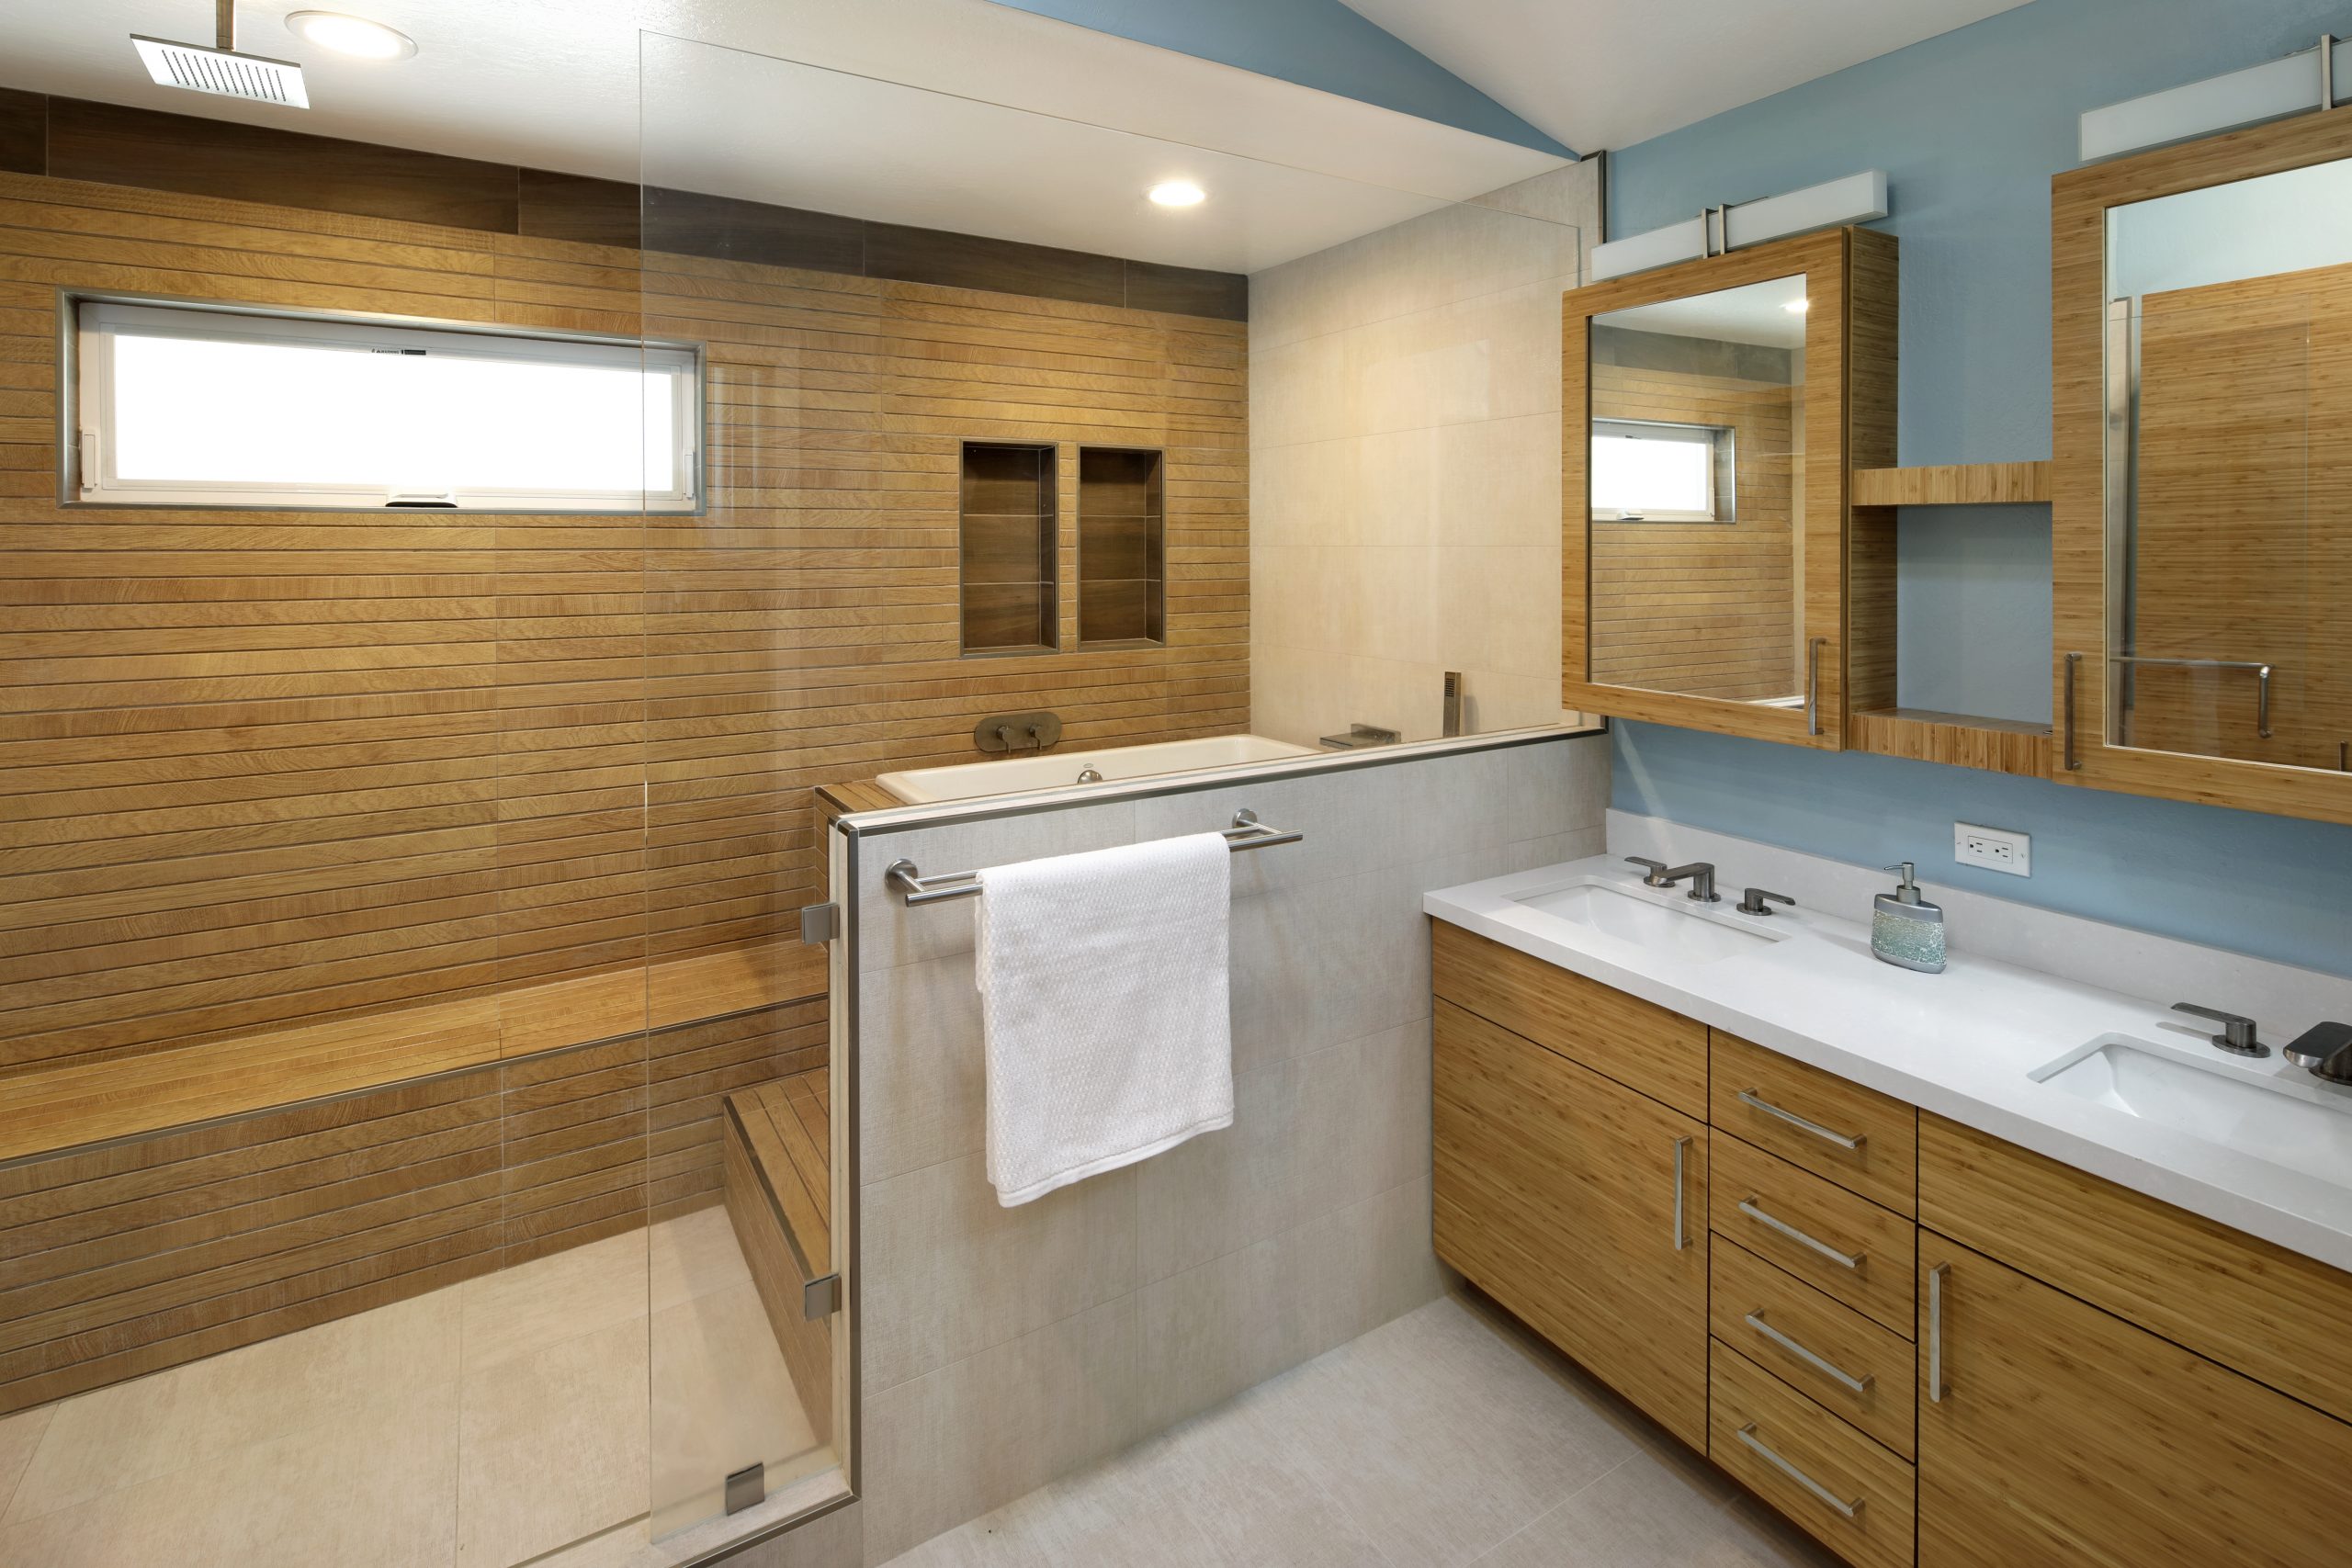 A Japanese style bathroom renovation with wooden shower and tub.